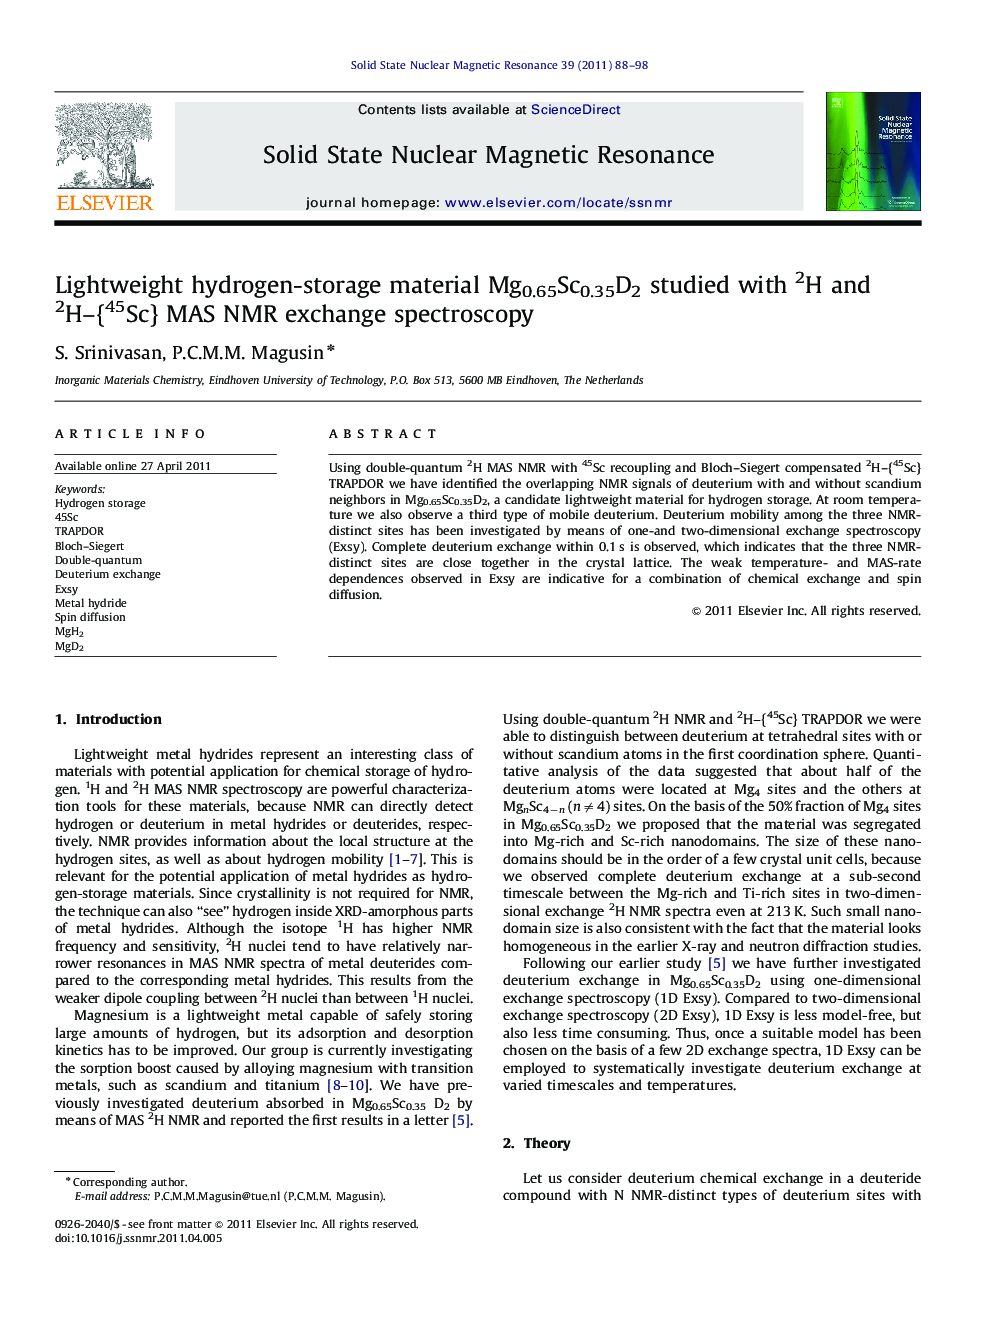 Lightweight hydrogen-storage material Mg0.65Sc0.35D2 studied with 2H and 2H-{45Sc} MAS NMR exchange spectroscopy